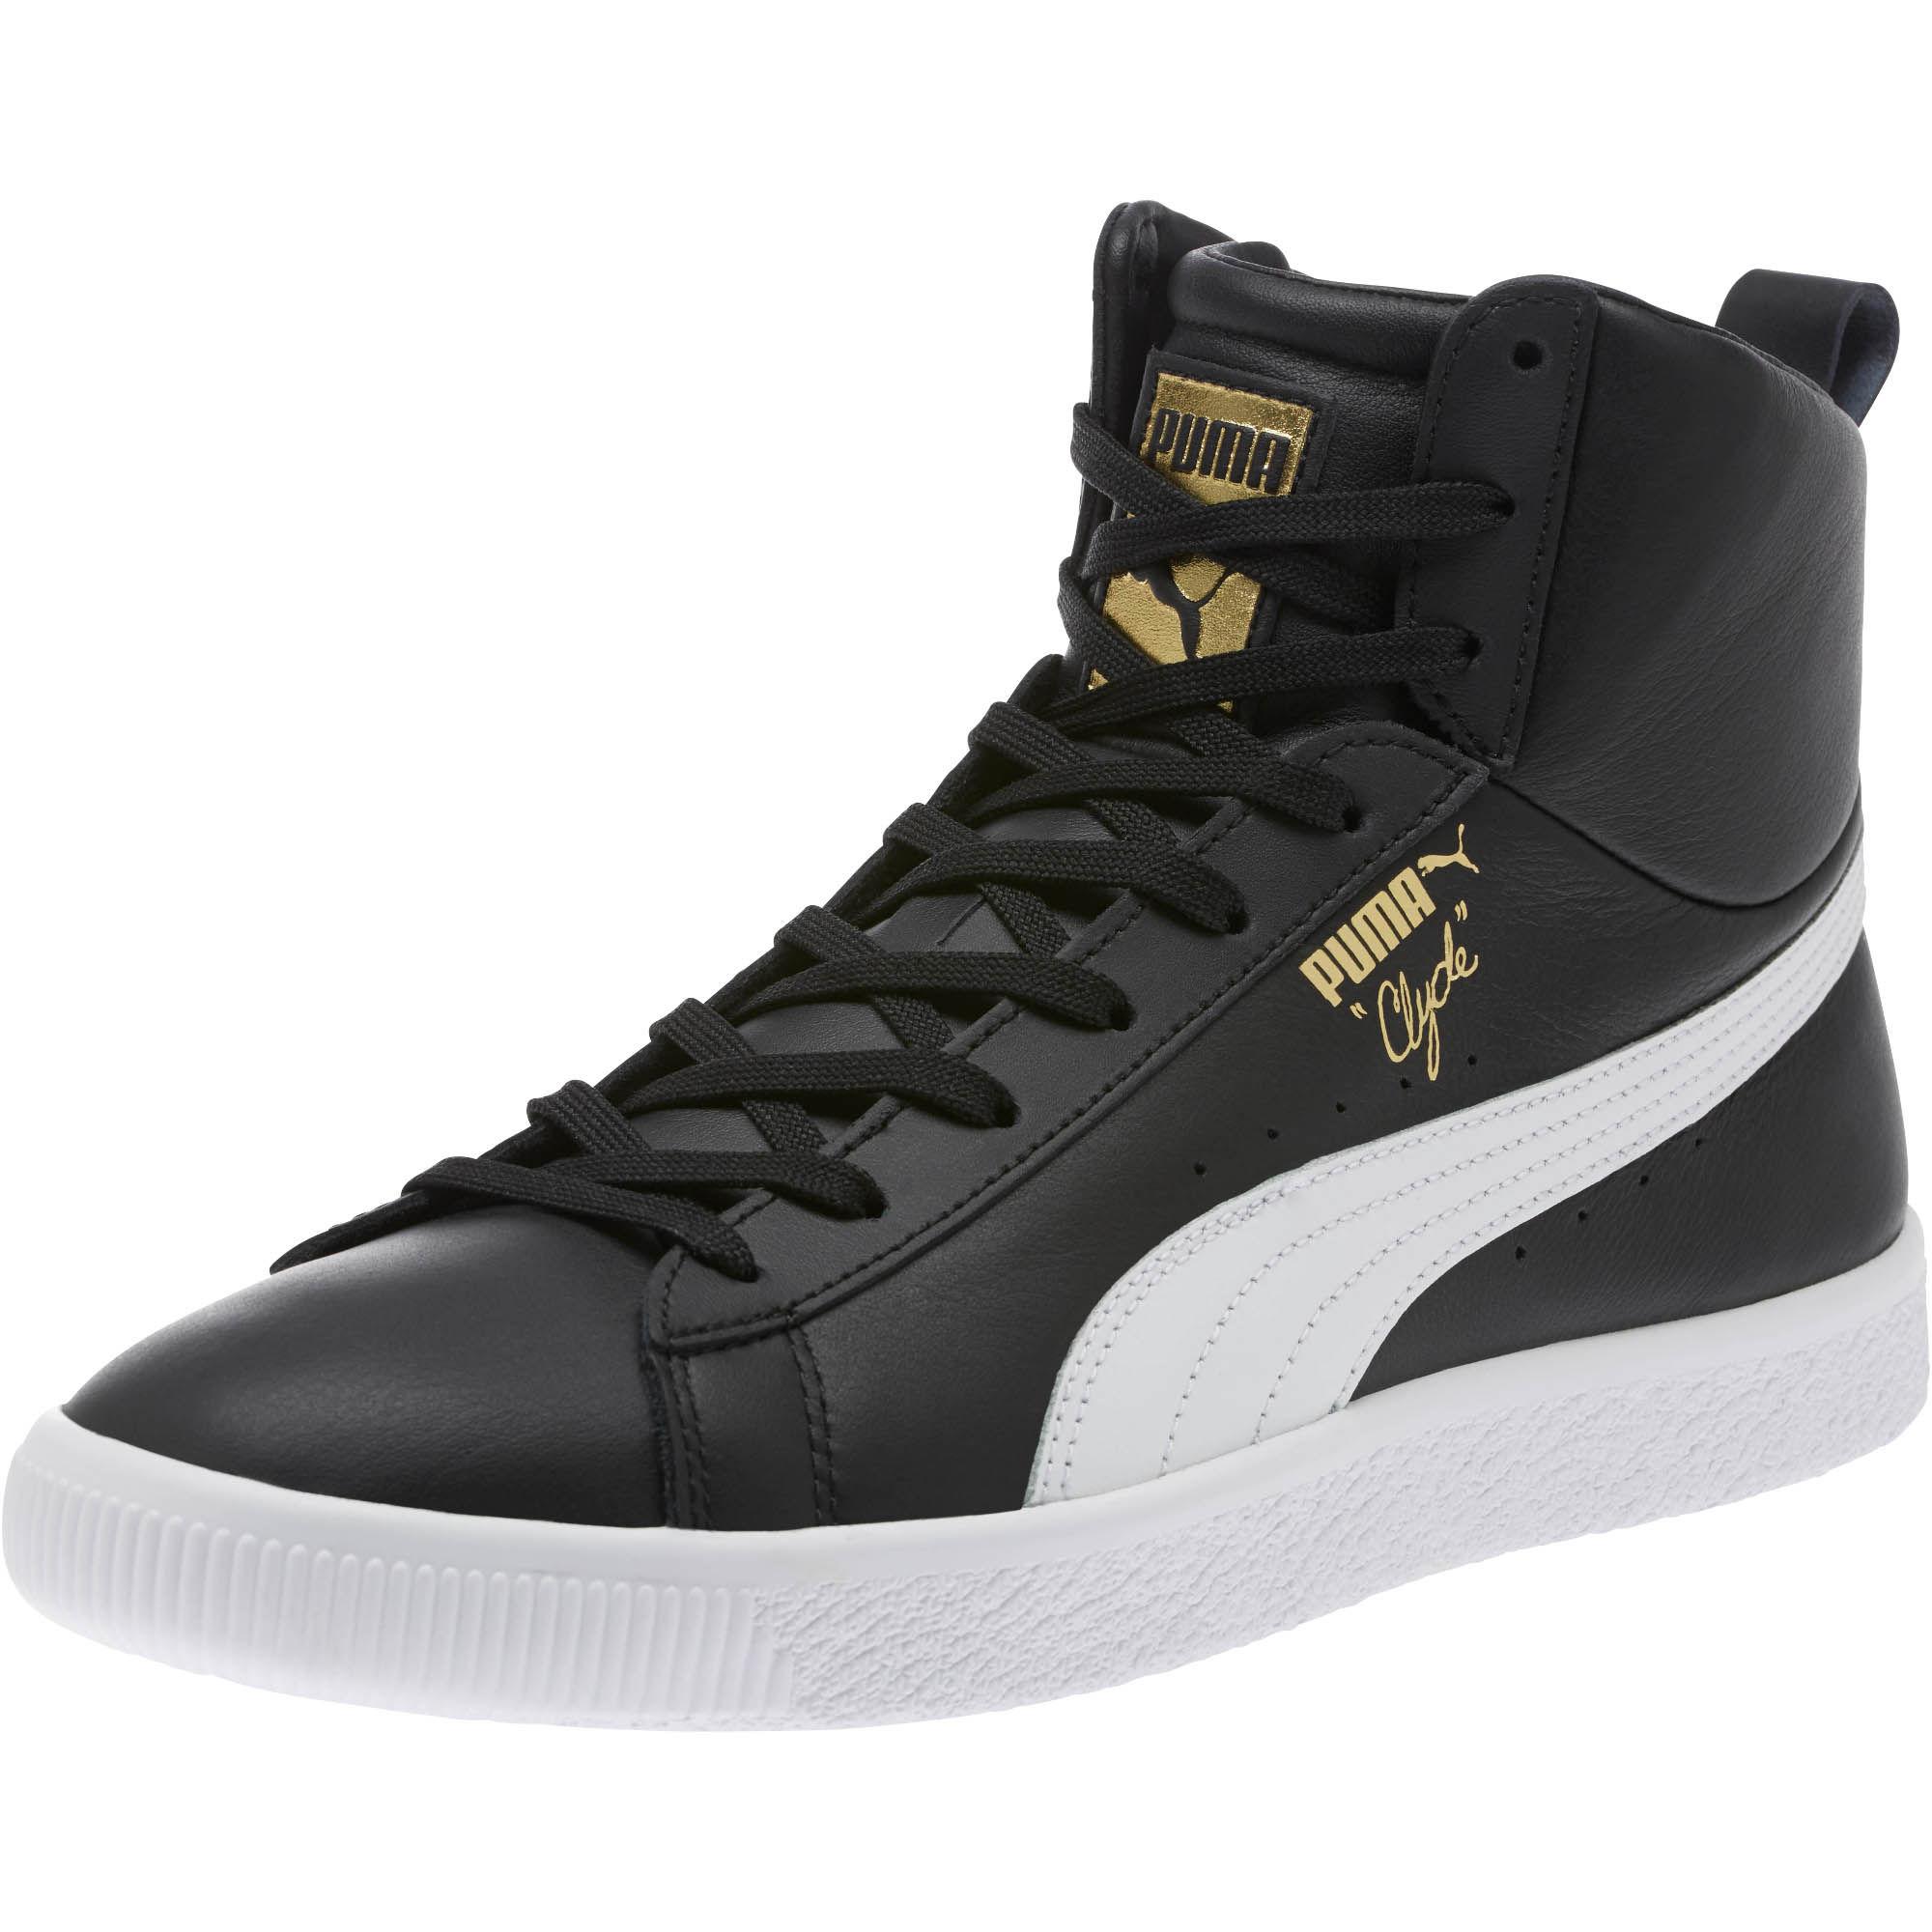 PUMA Leather Clyde Core Mid Sneakers in Black for Men - Lyst